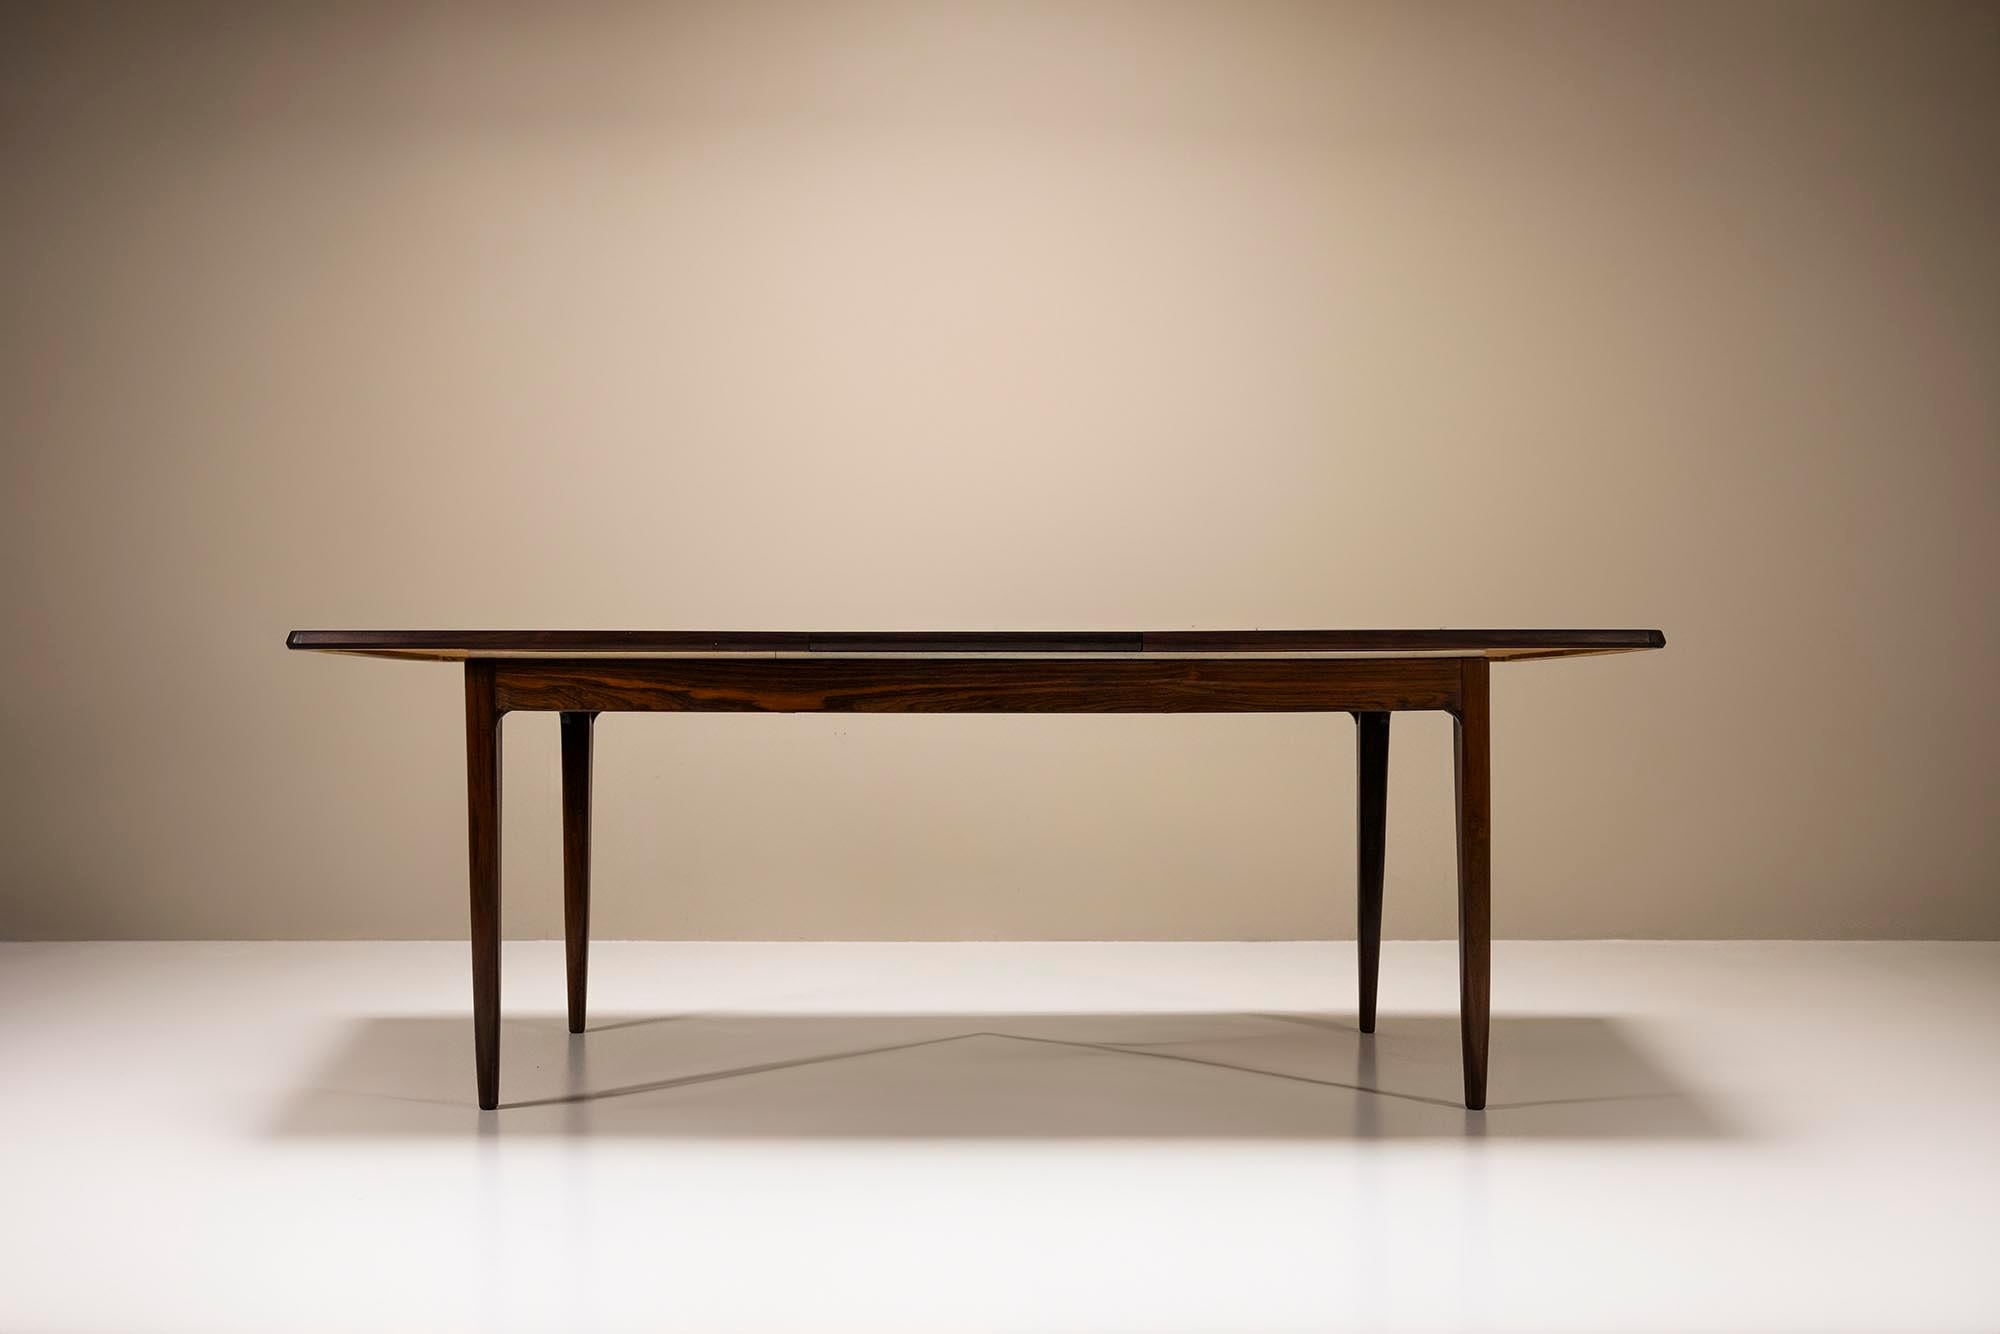 Extendable boat-shaped dining table in palissander wood.

This elegant dining room table is a refined example of Danish craftsmanship and both the design and construction have stood the test of time. The table can be extended by simply extending